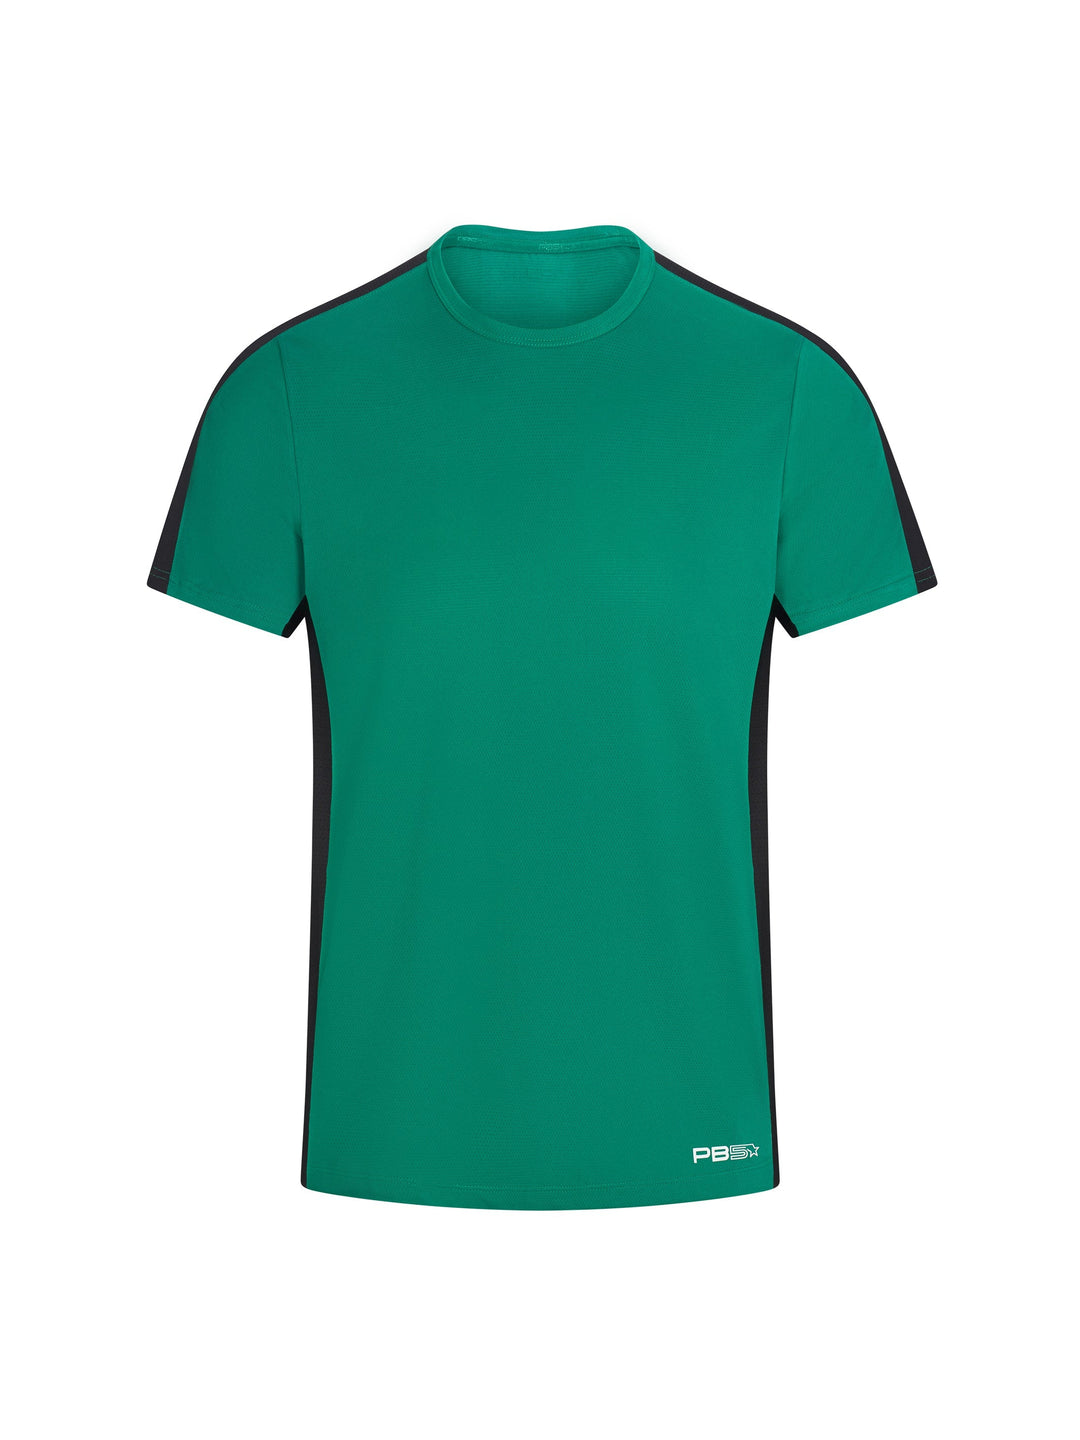 Men's Core Vented Tee front view in Jade. Small logo printed on lower left front.